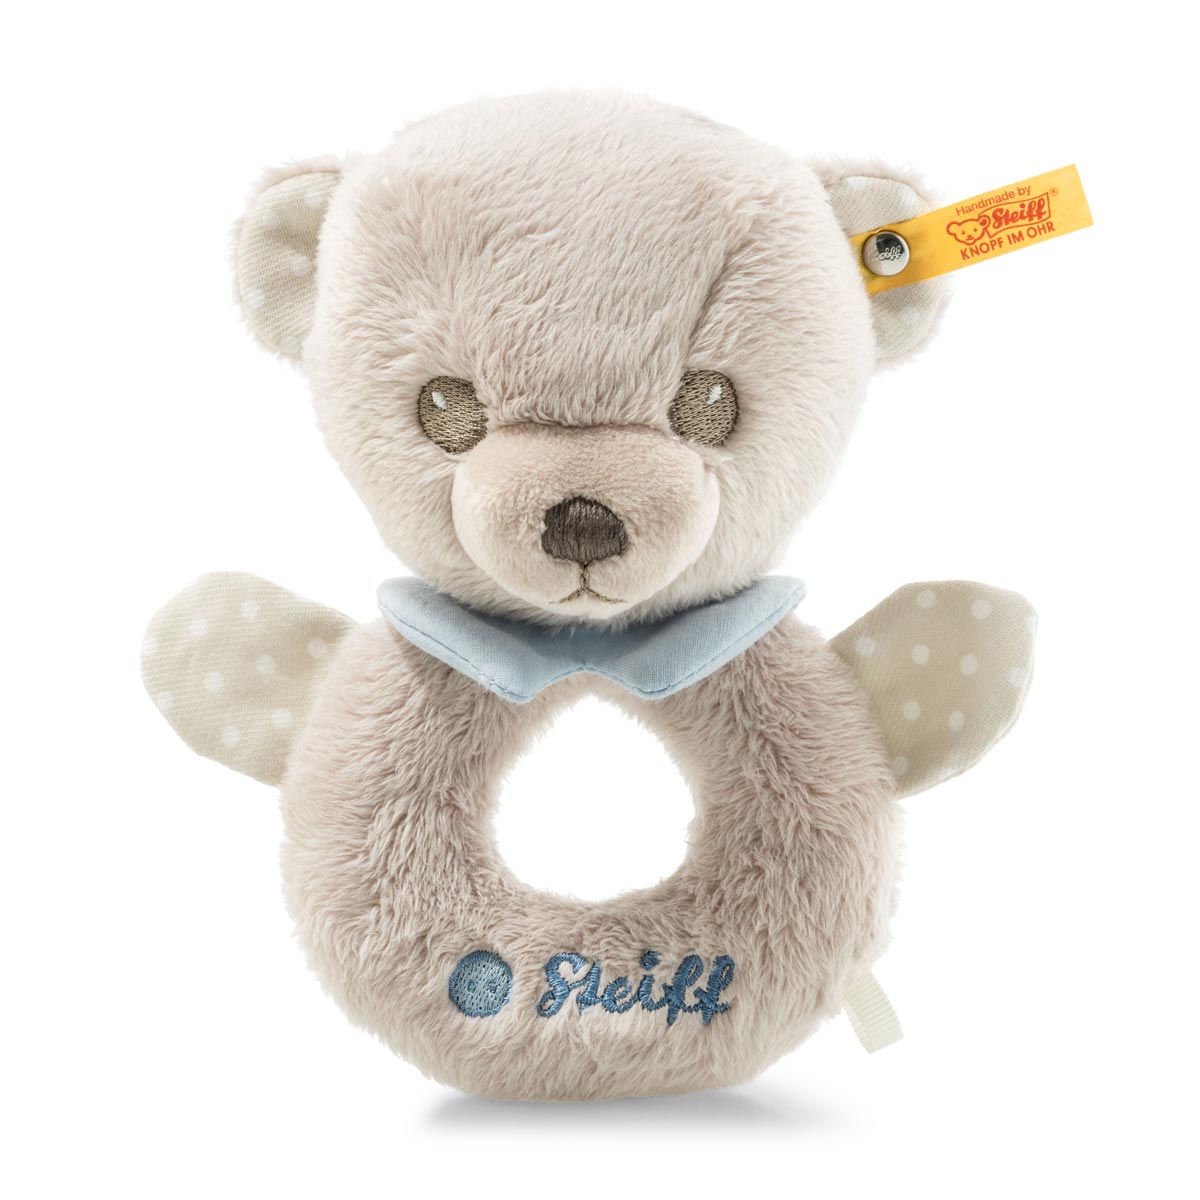 Steiff Hello Baby Levi Teddy Bear Grip Ring with Rattle in a Gift Box, Multi-Colour